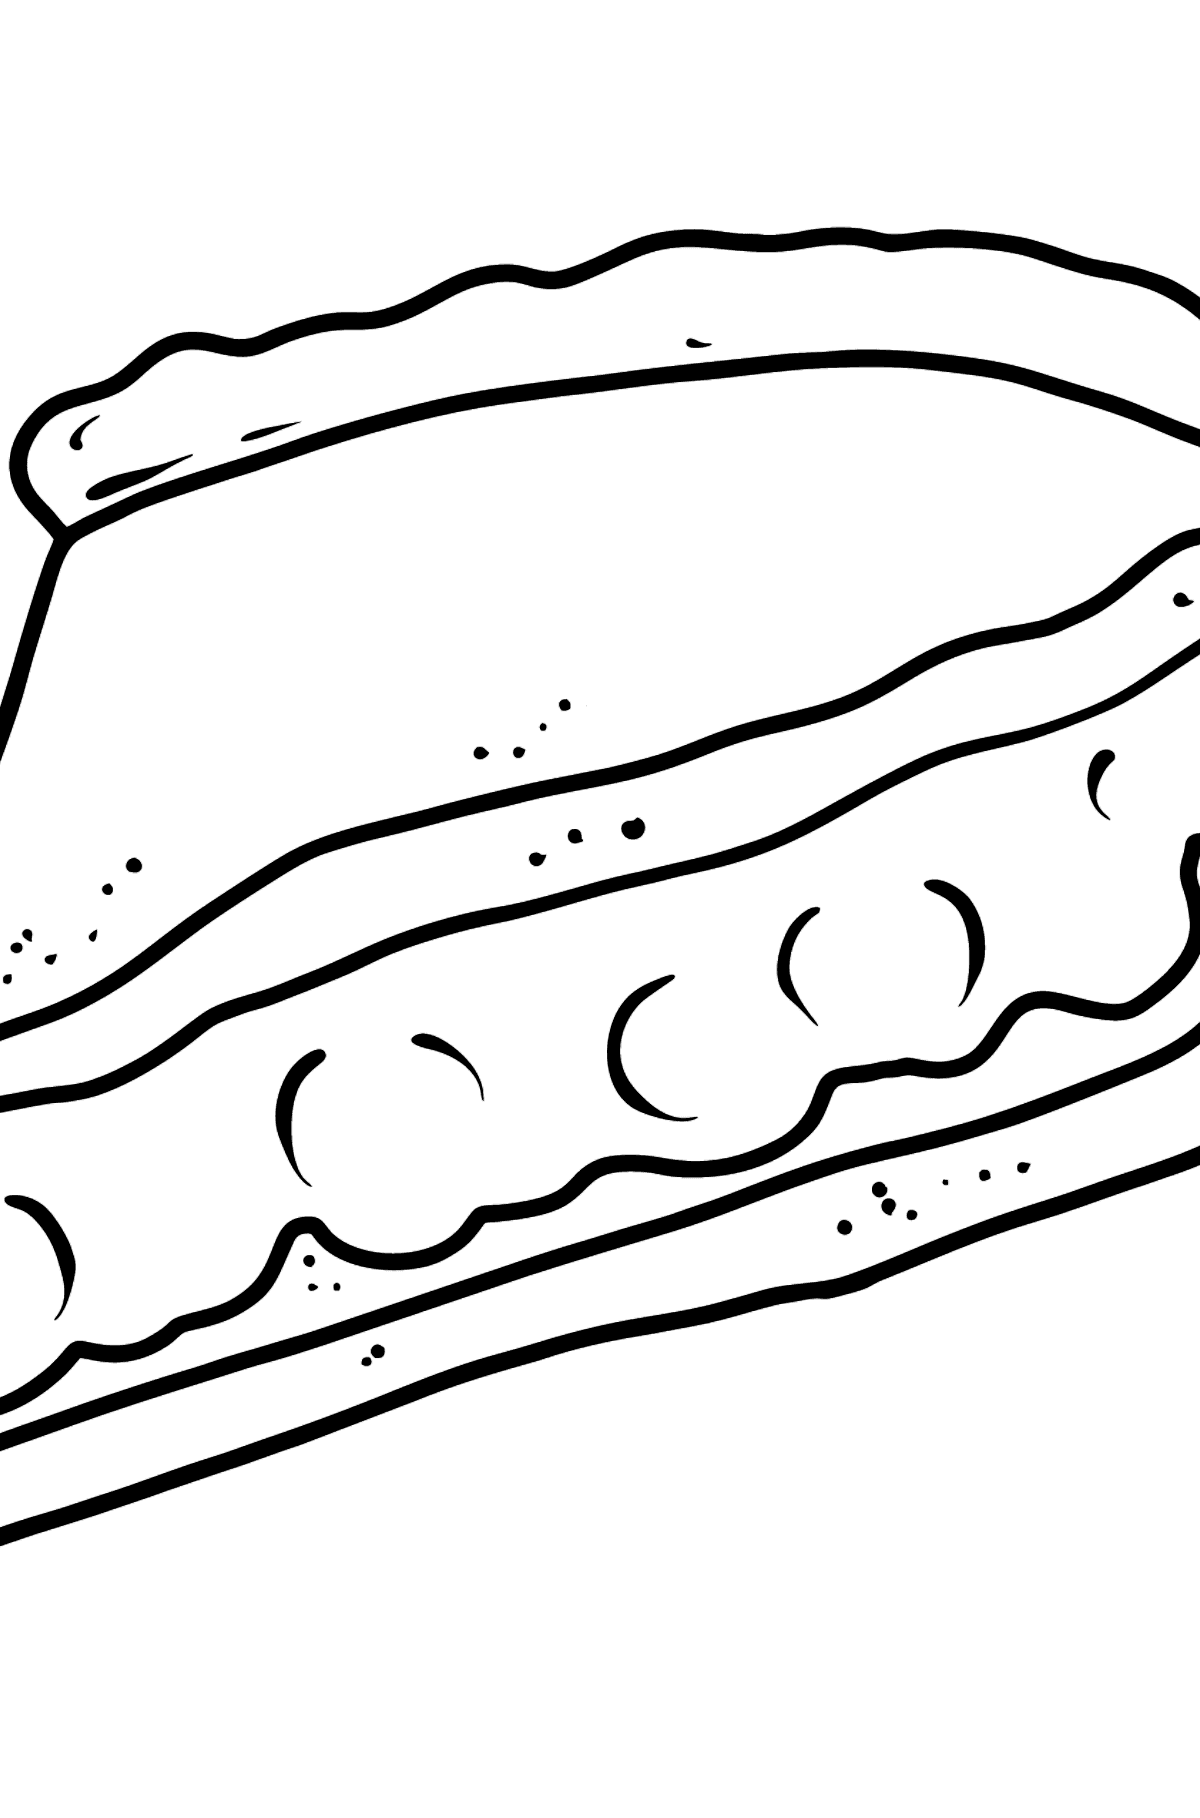 Pie with Berries coloring page - Coloring Pages for Kids